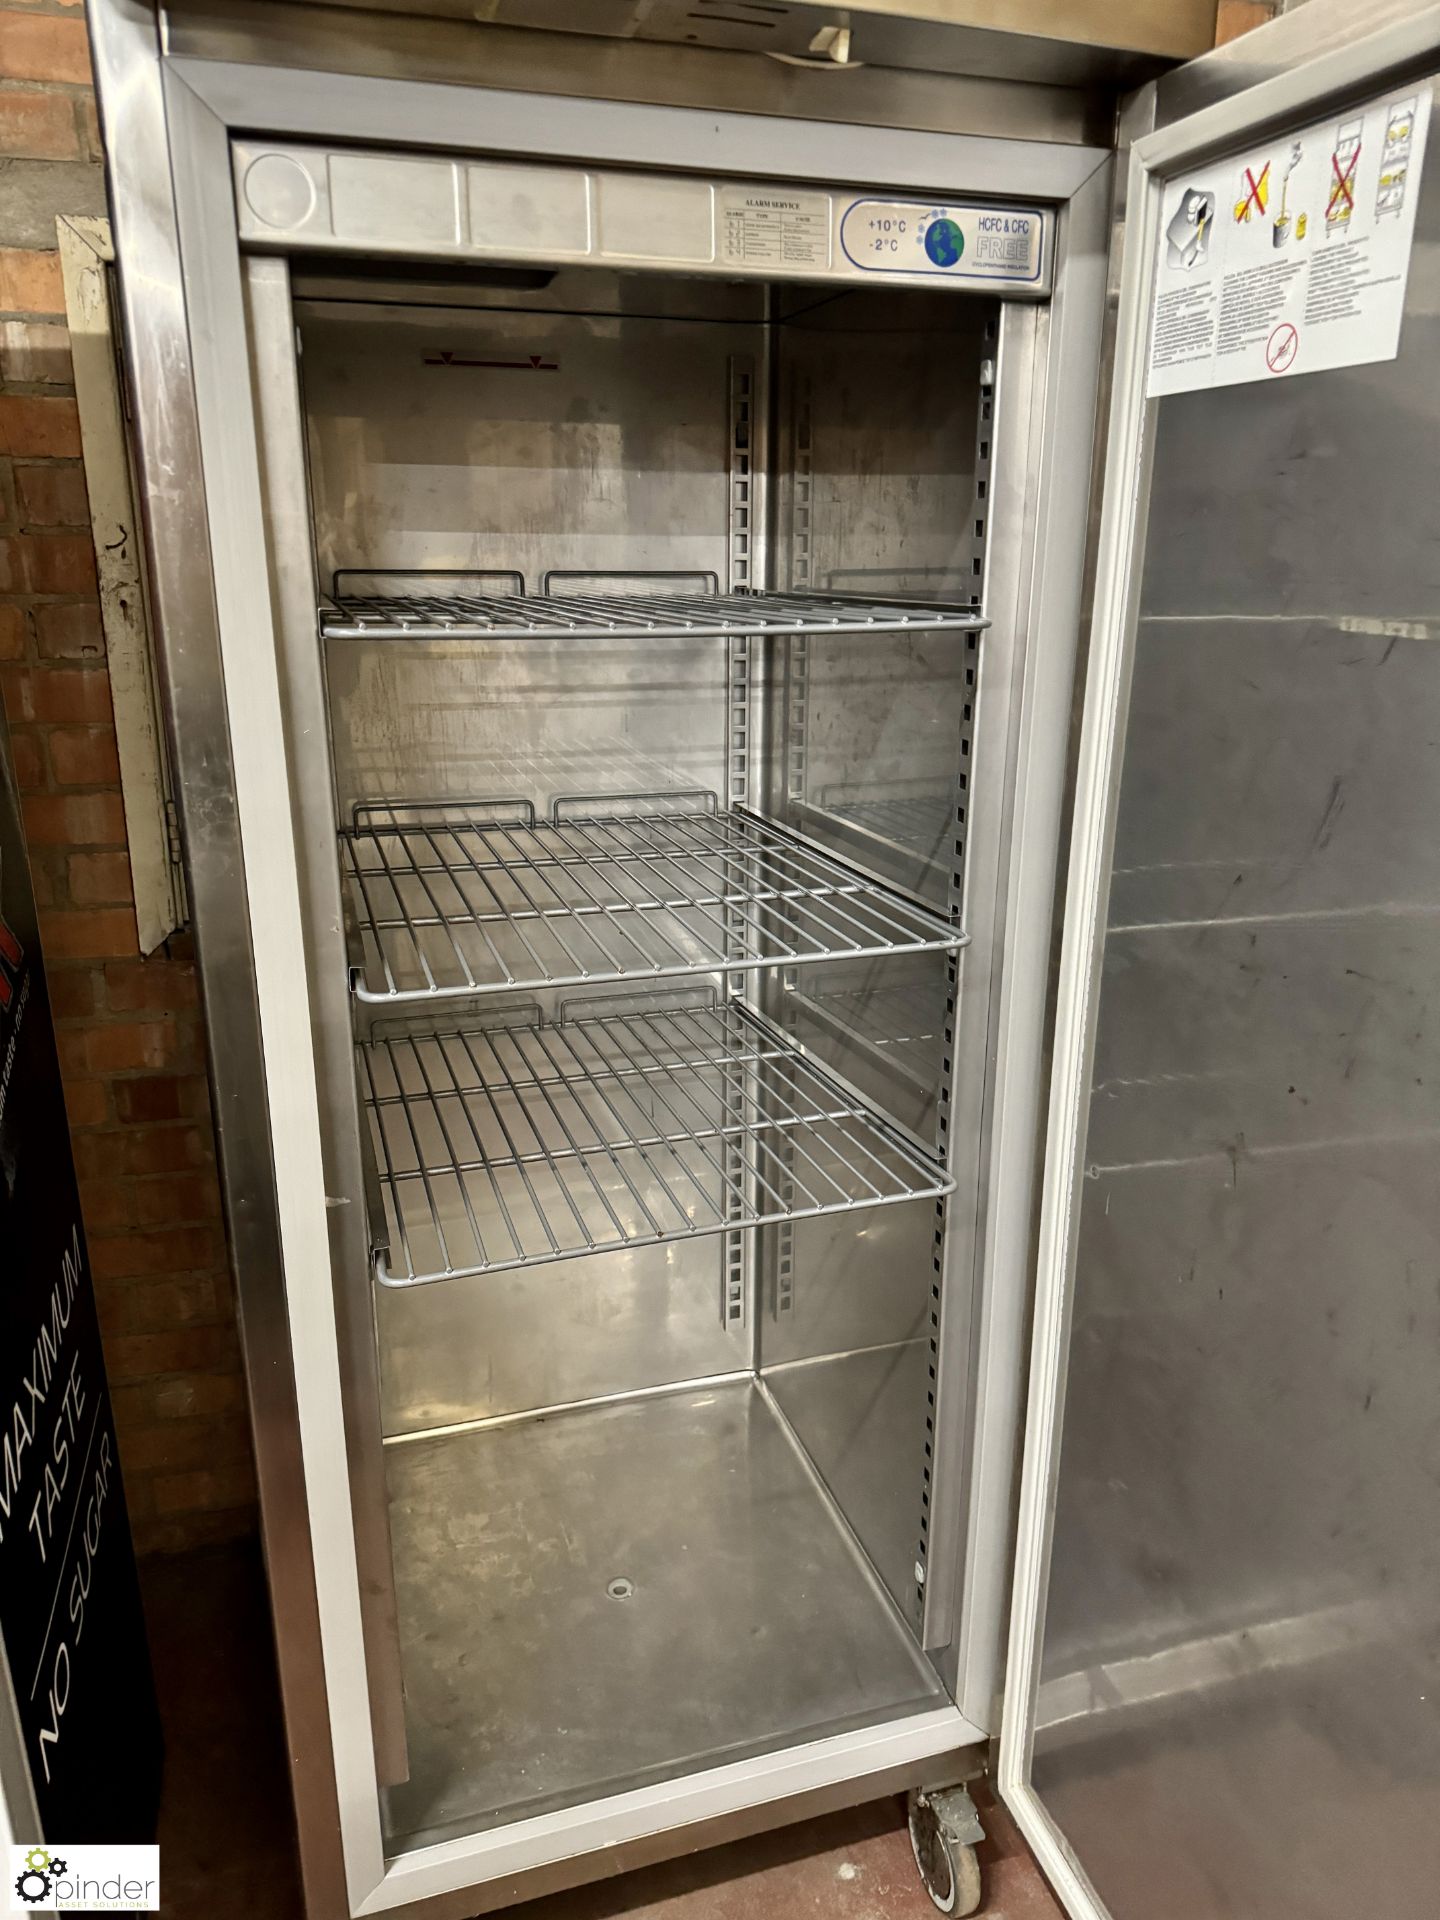 Electrolux stainless steel mobile single door Fridge, 240volts, 760mm x 800mm x 2100mm - Image 4 of 5